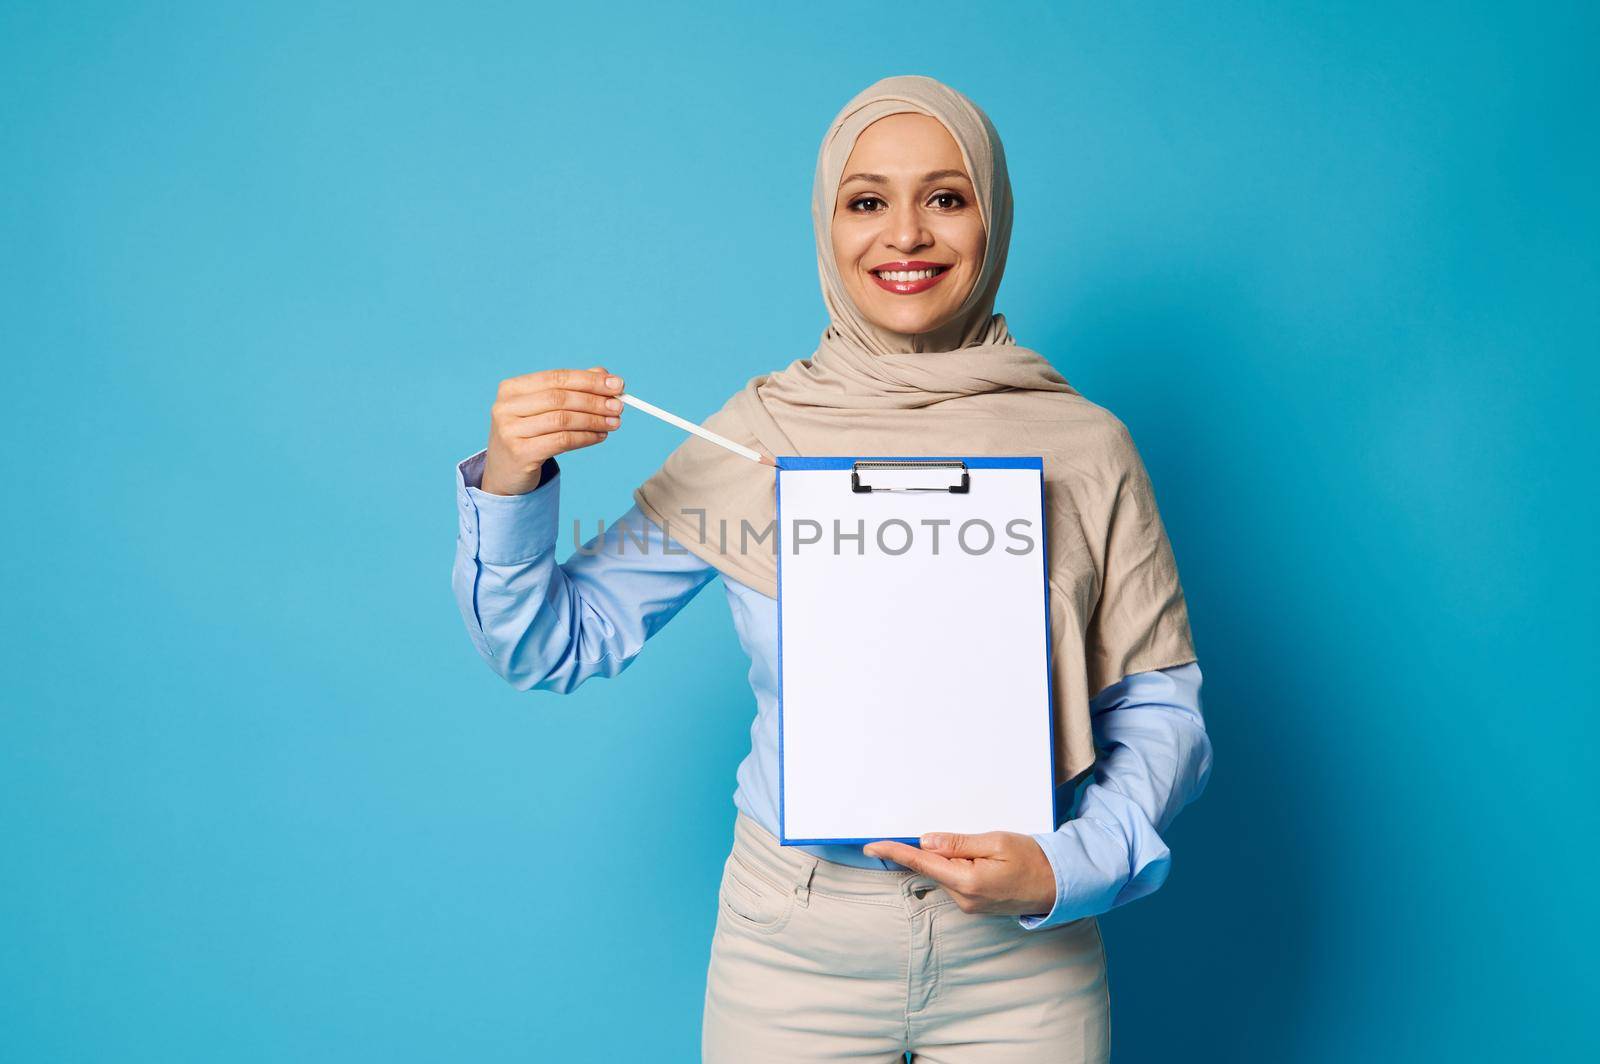 Smiling Arab woman with covered head in hijab pointing a pen on a blank surface on a white paper sheet by artgf